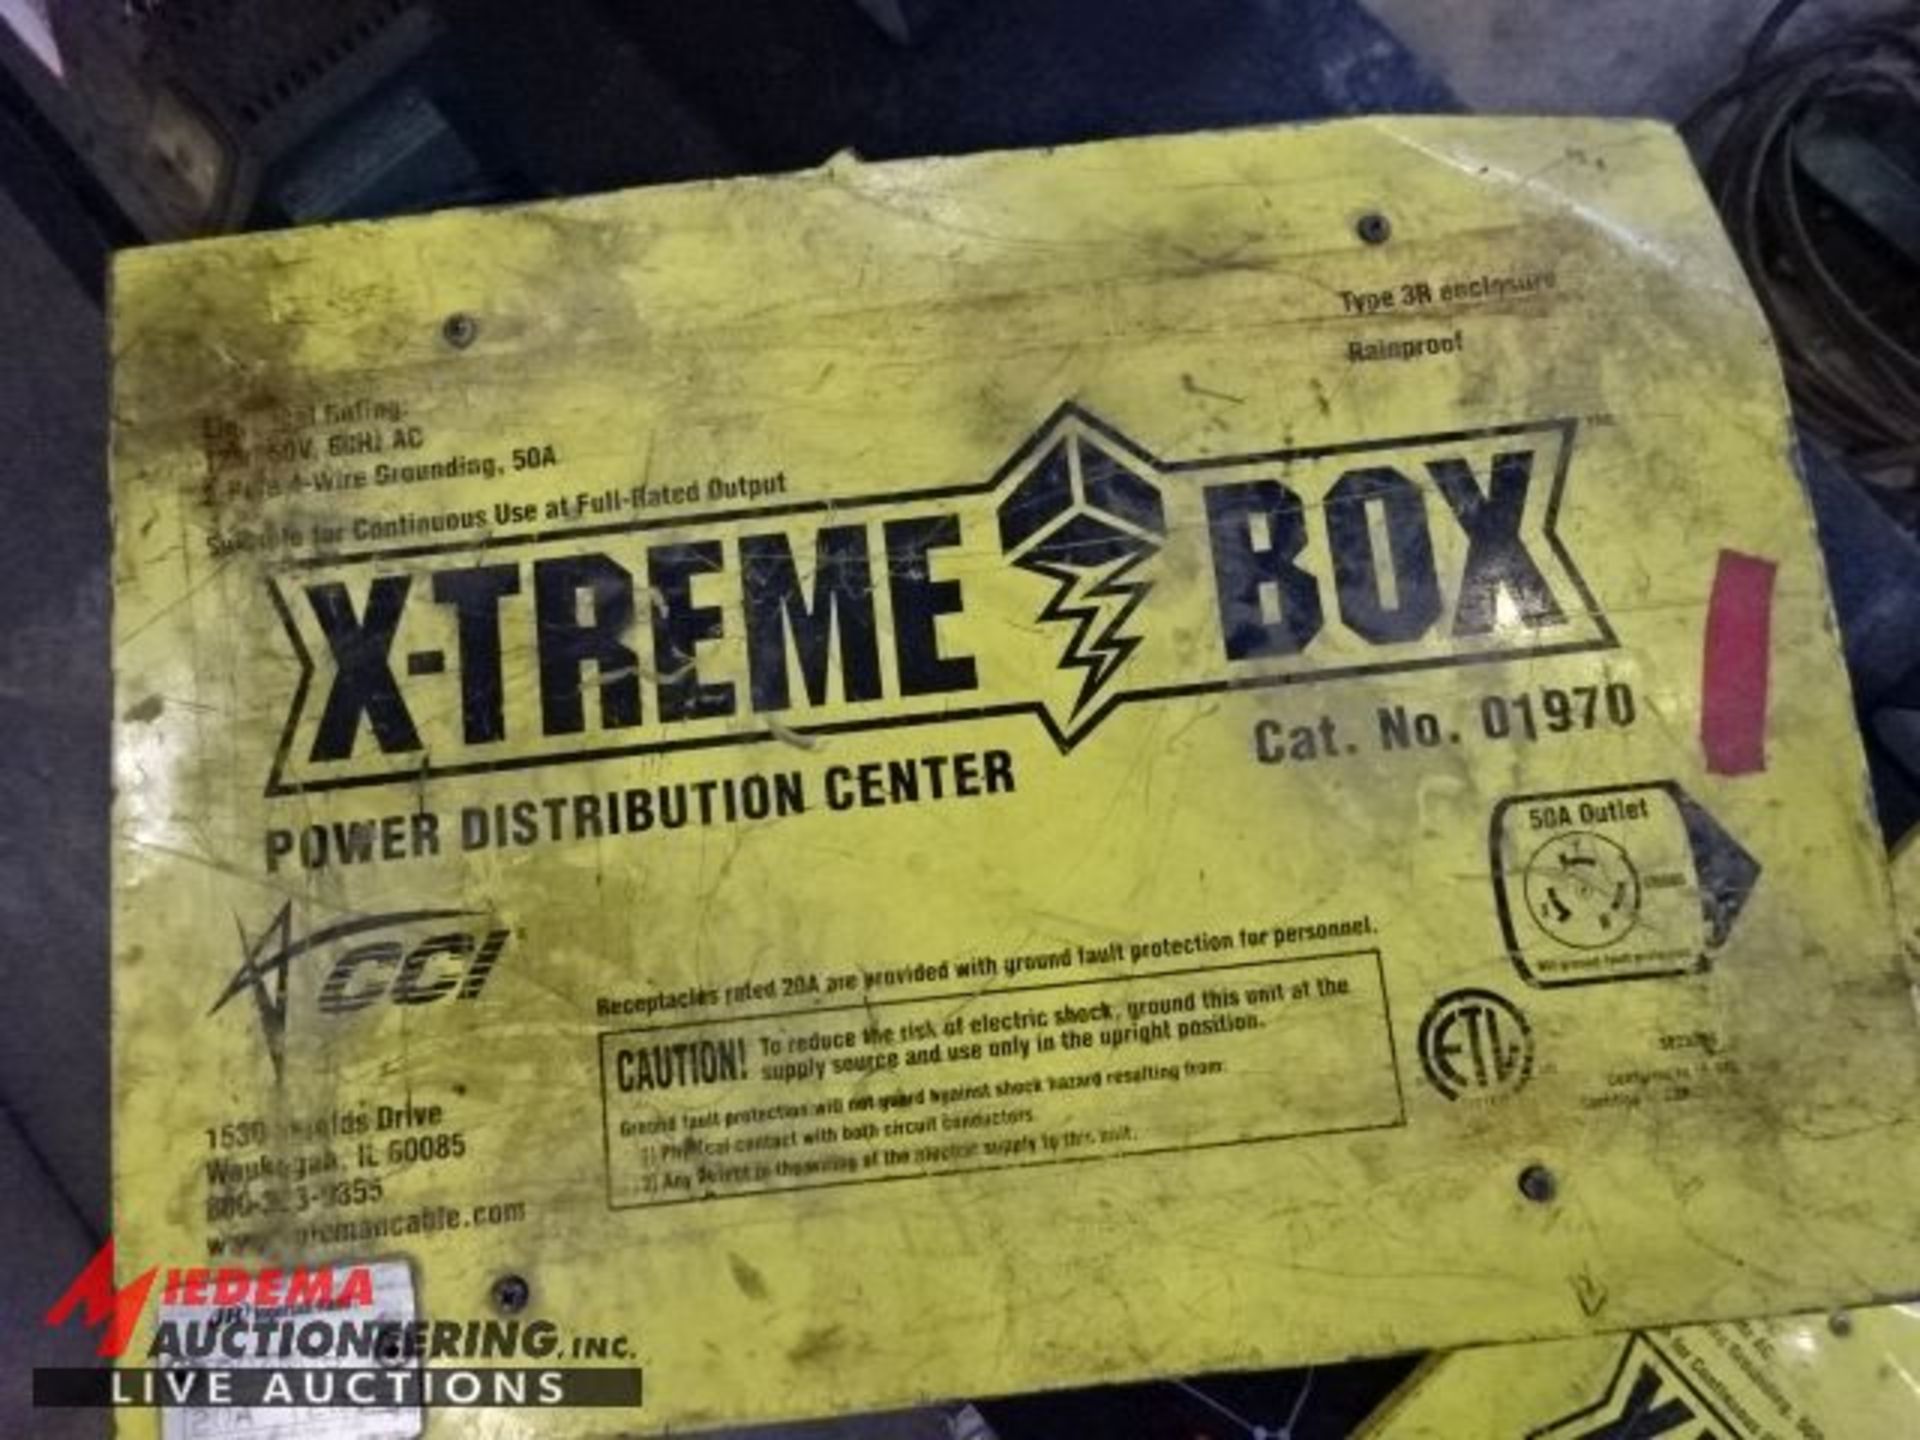 INGERSOLL RAND 20A120V X-TREME POWER BOX POWER DISTRIBUTION CENTER - Image 5 of 5